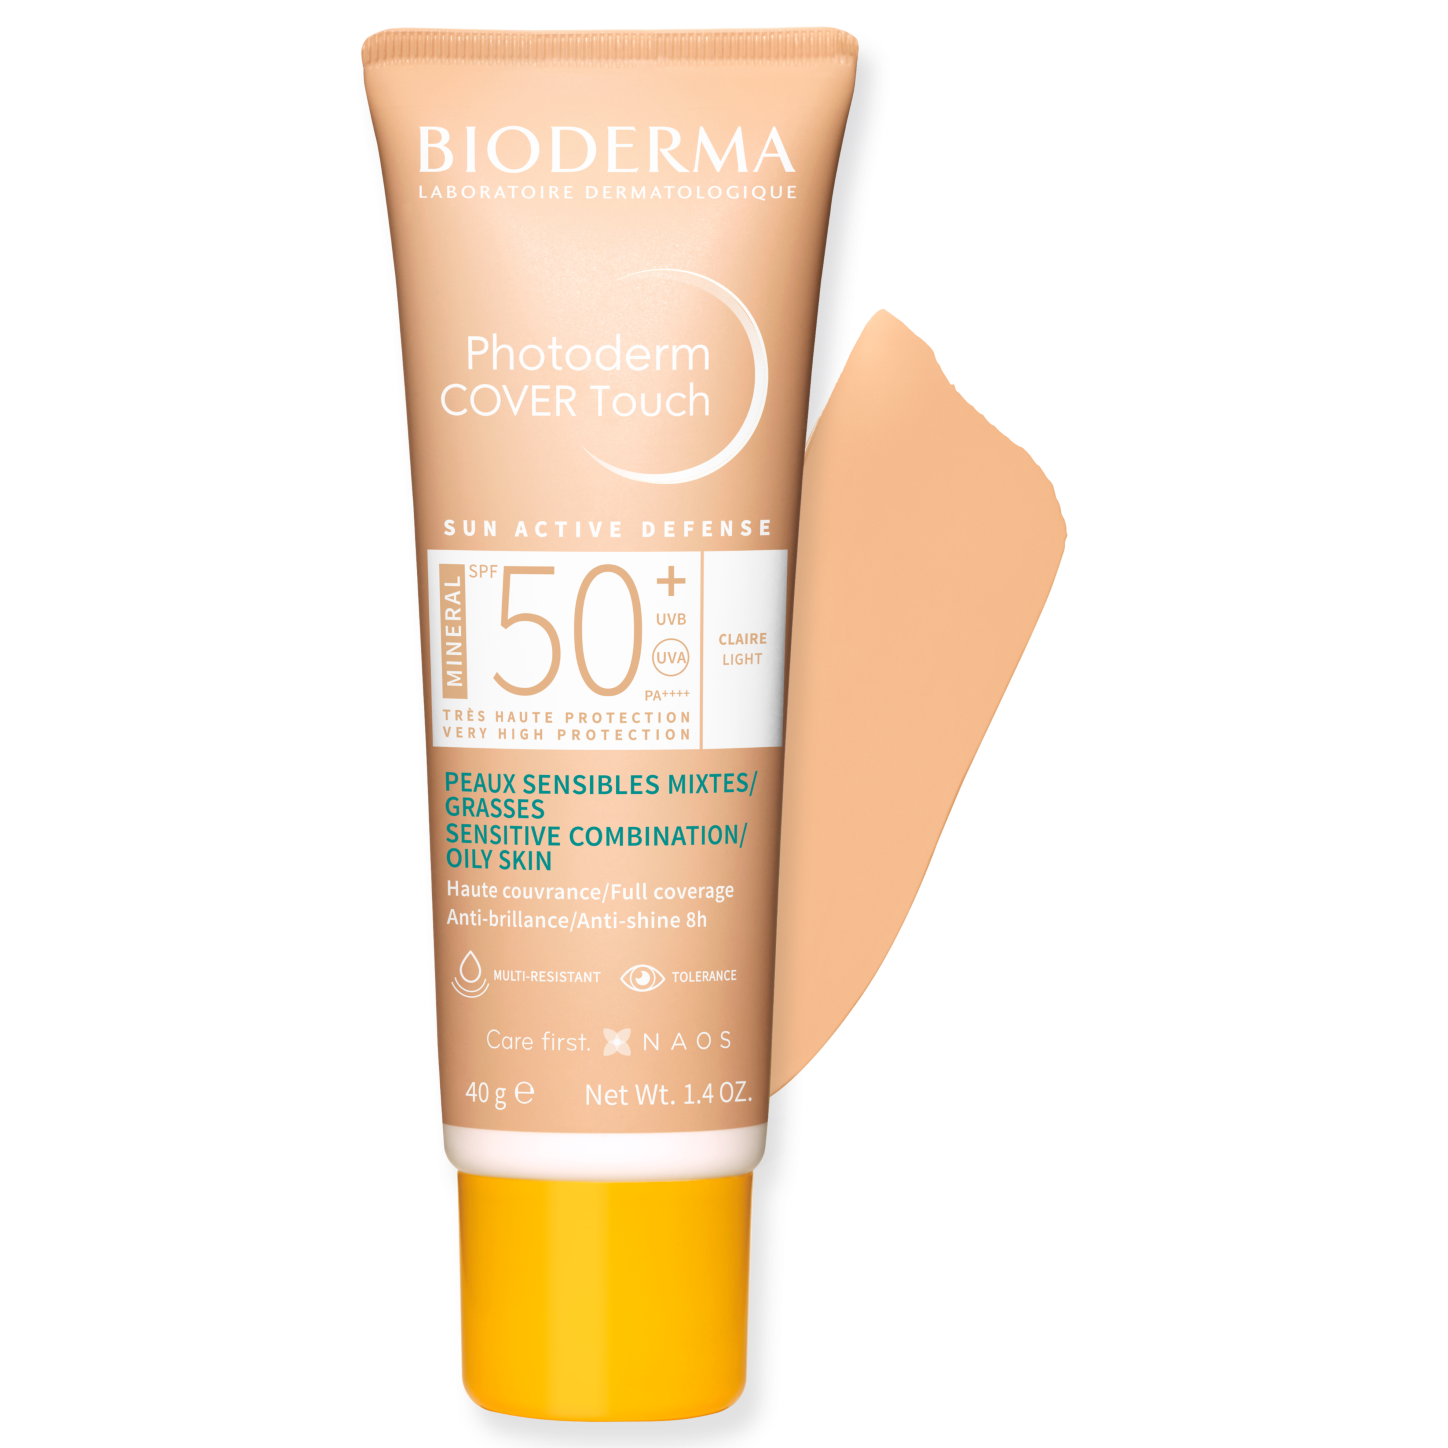 Photoderm COVER Touch MINERAL SPF50+ light (világos) -Bioderma